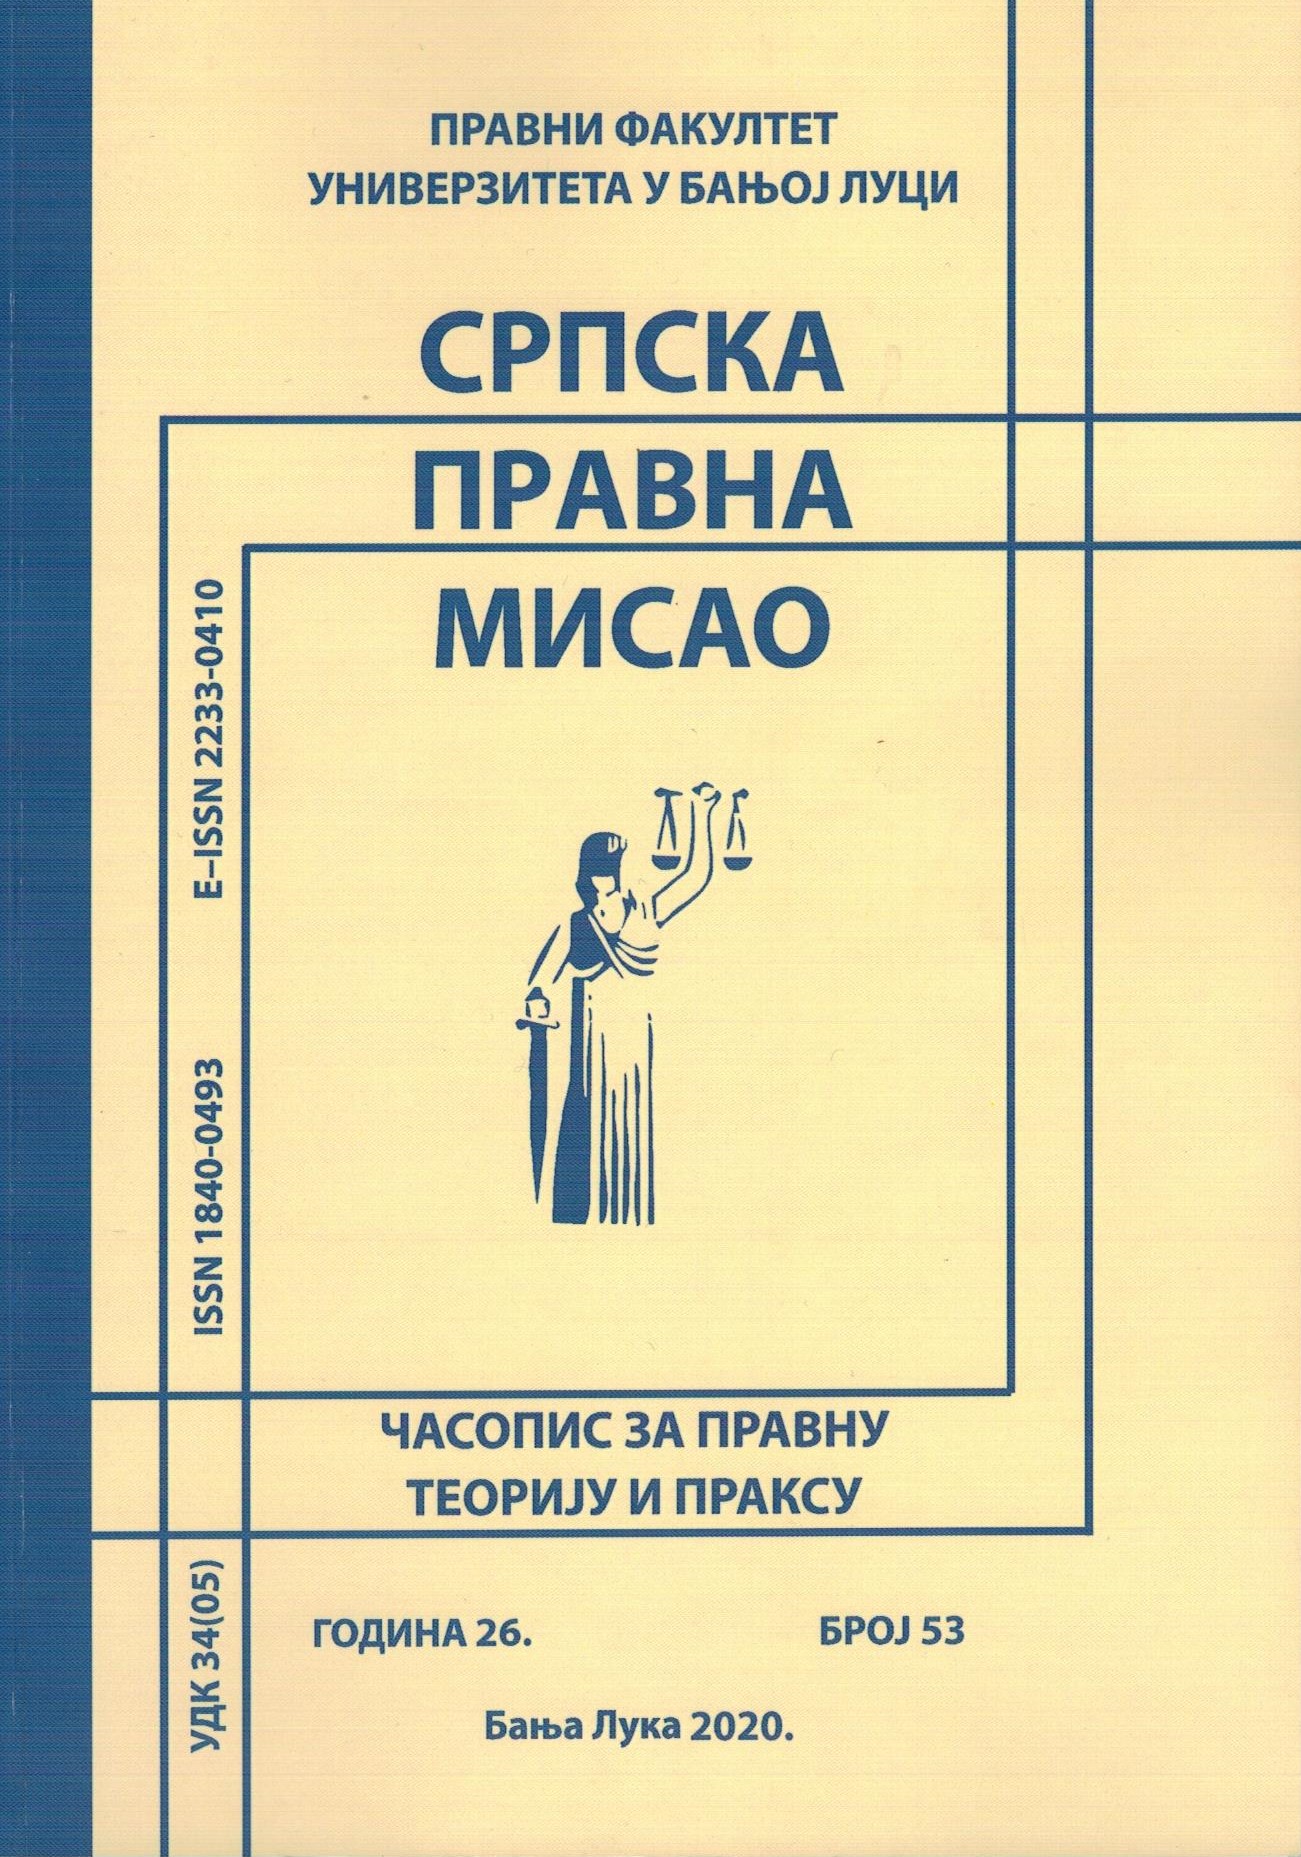 PRACTICE OF THE CONSTITUTIONAL COURT OF THE REPUBLIC OF SERBIA Cover Image